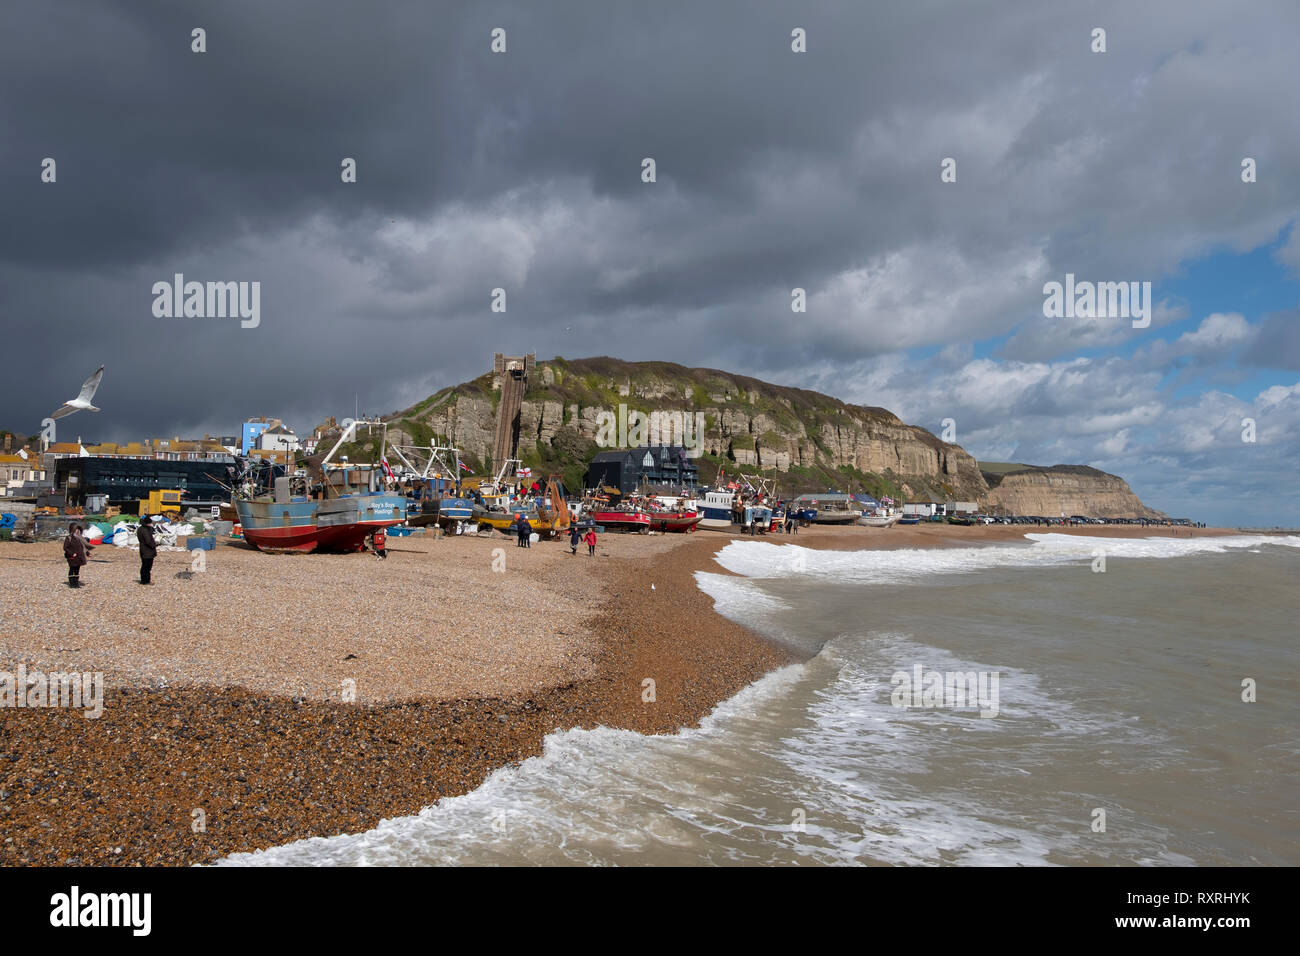 Hastings, East Sussex, UK. 10th March 2019. Hastings fishing boats pulled up high on the Stade beach, protected by the new sea defences and out of reach of the rough sea driven by onshore gales. Hastings has the largest beach-launched commercial fishing fleet in Europe. Stock Photo